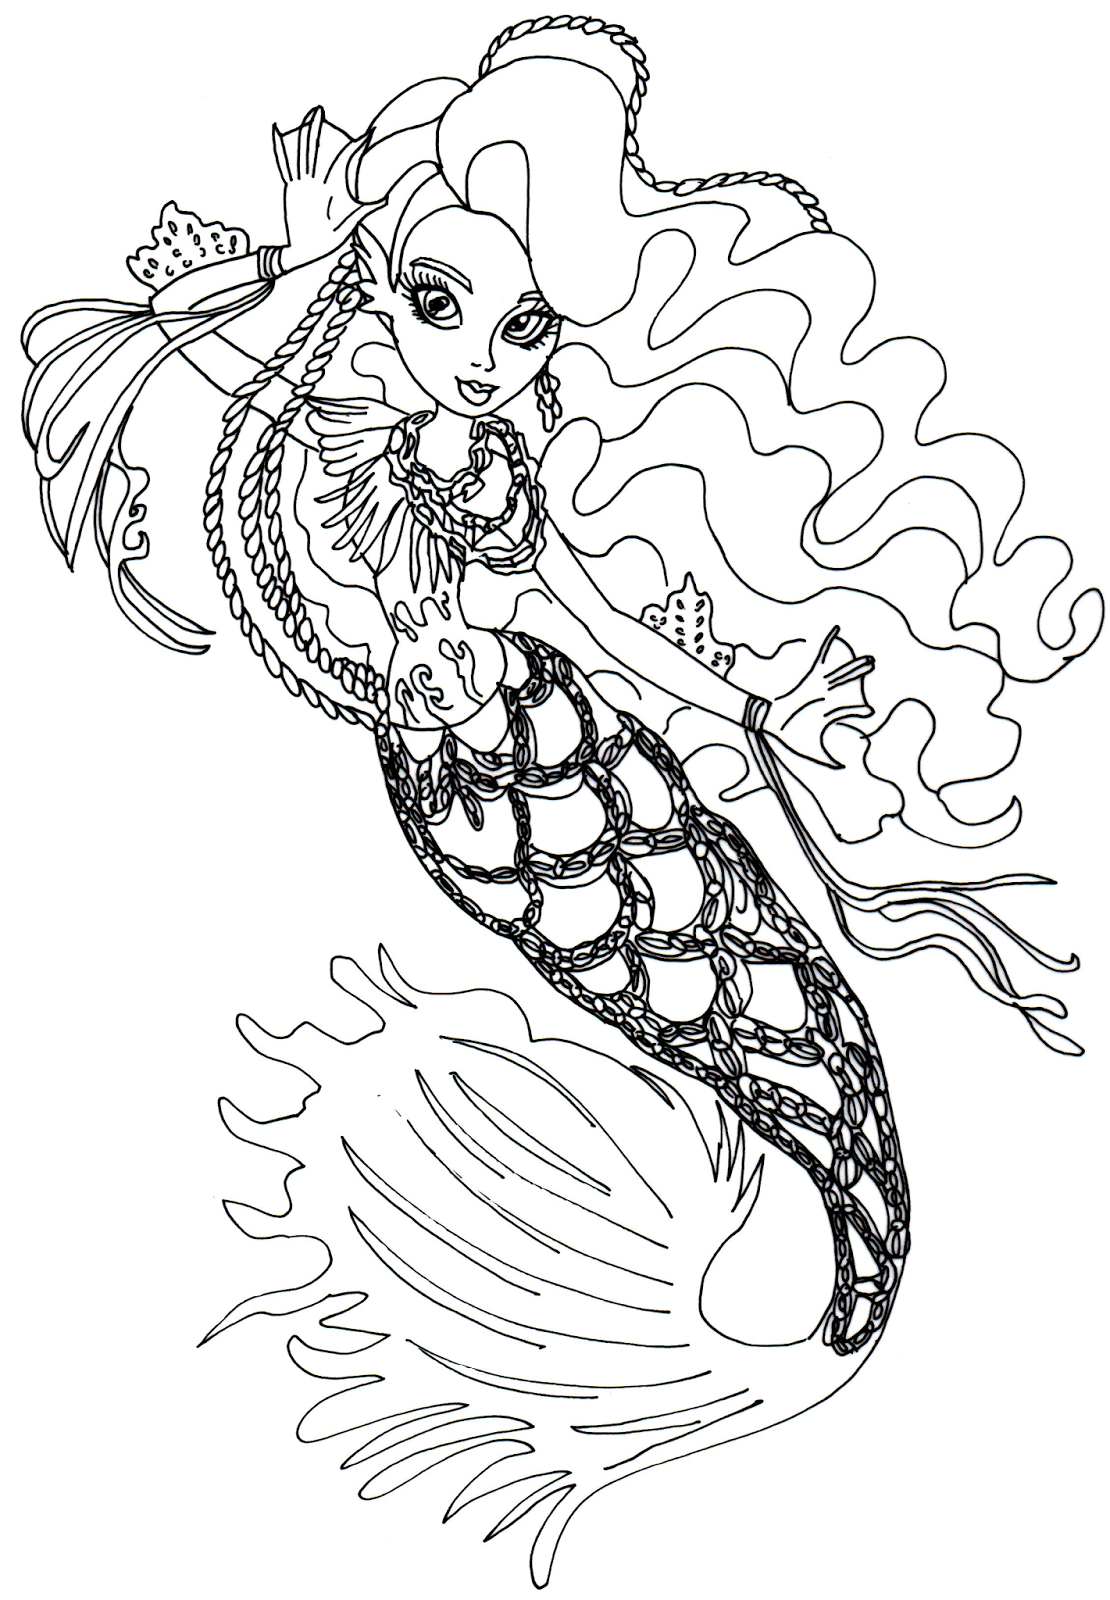 All Monster High Dolls Coloring Pages - Coloring Home